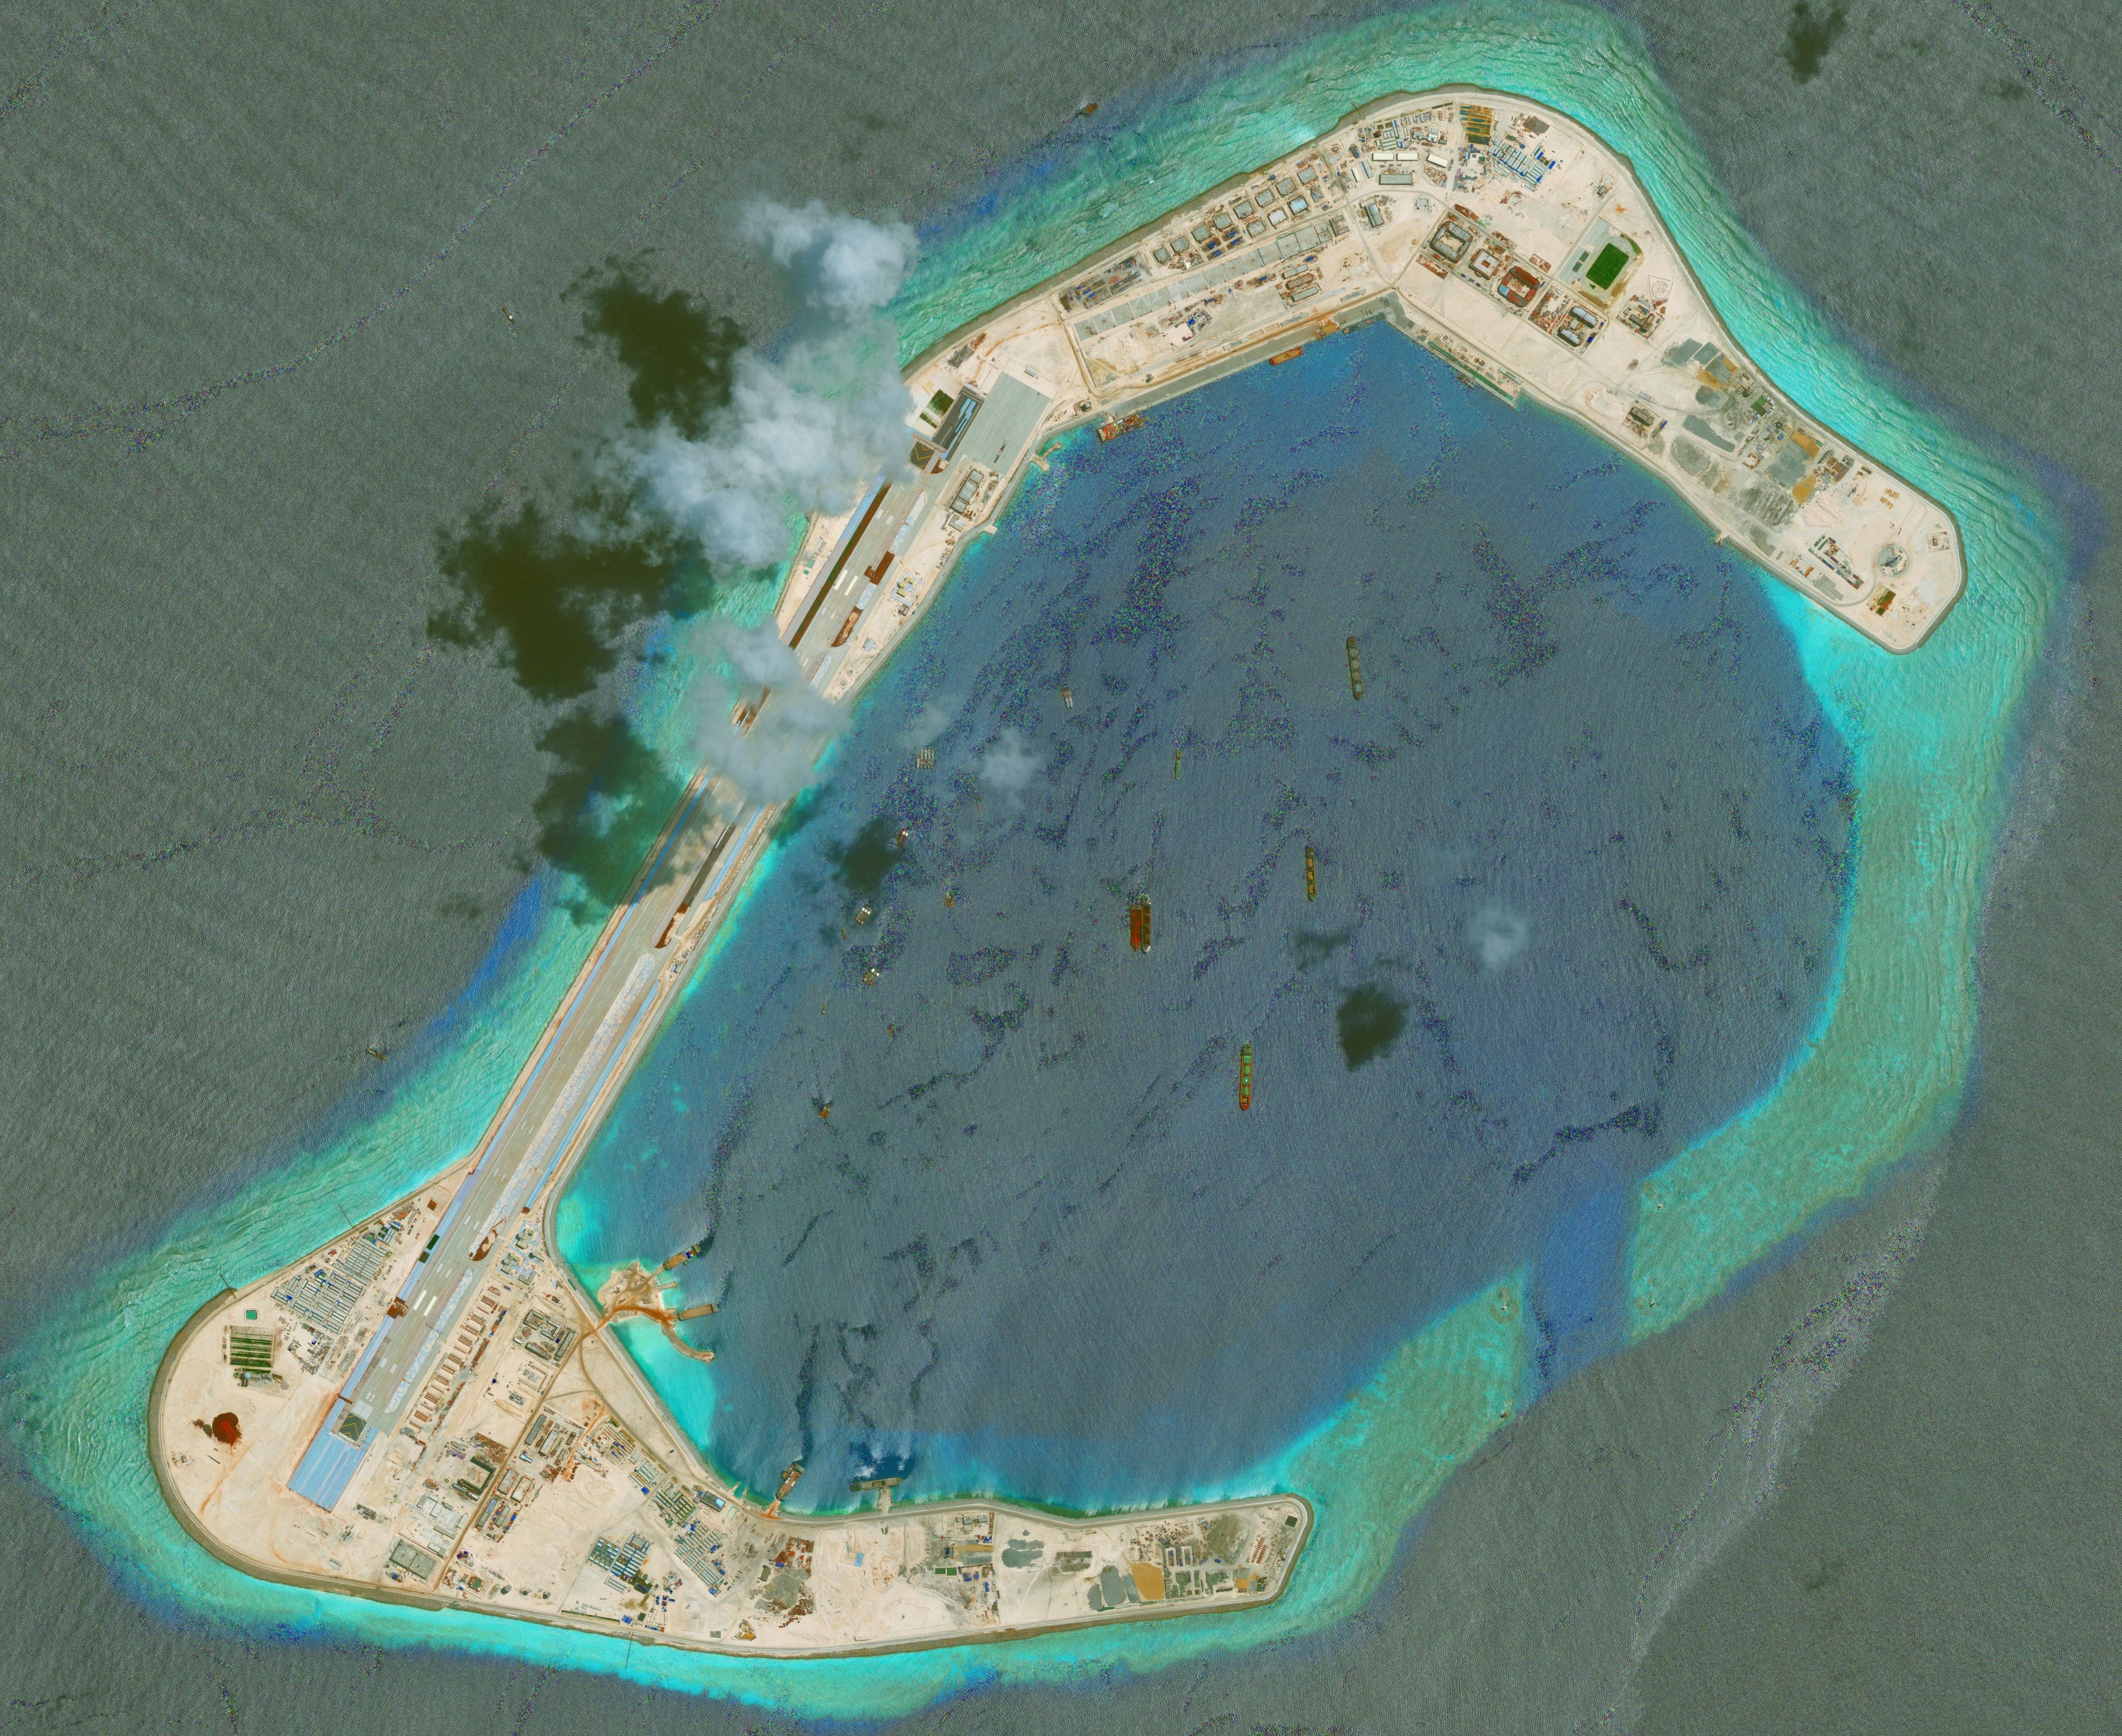 DigitalGlobe imagery of the Subi Reef in the South China Sea, a part of the Spratly Islands group.  Imagery from May 20, 2016.  Photo DigitalGlobe via Getty Images.